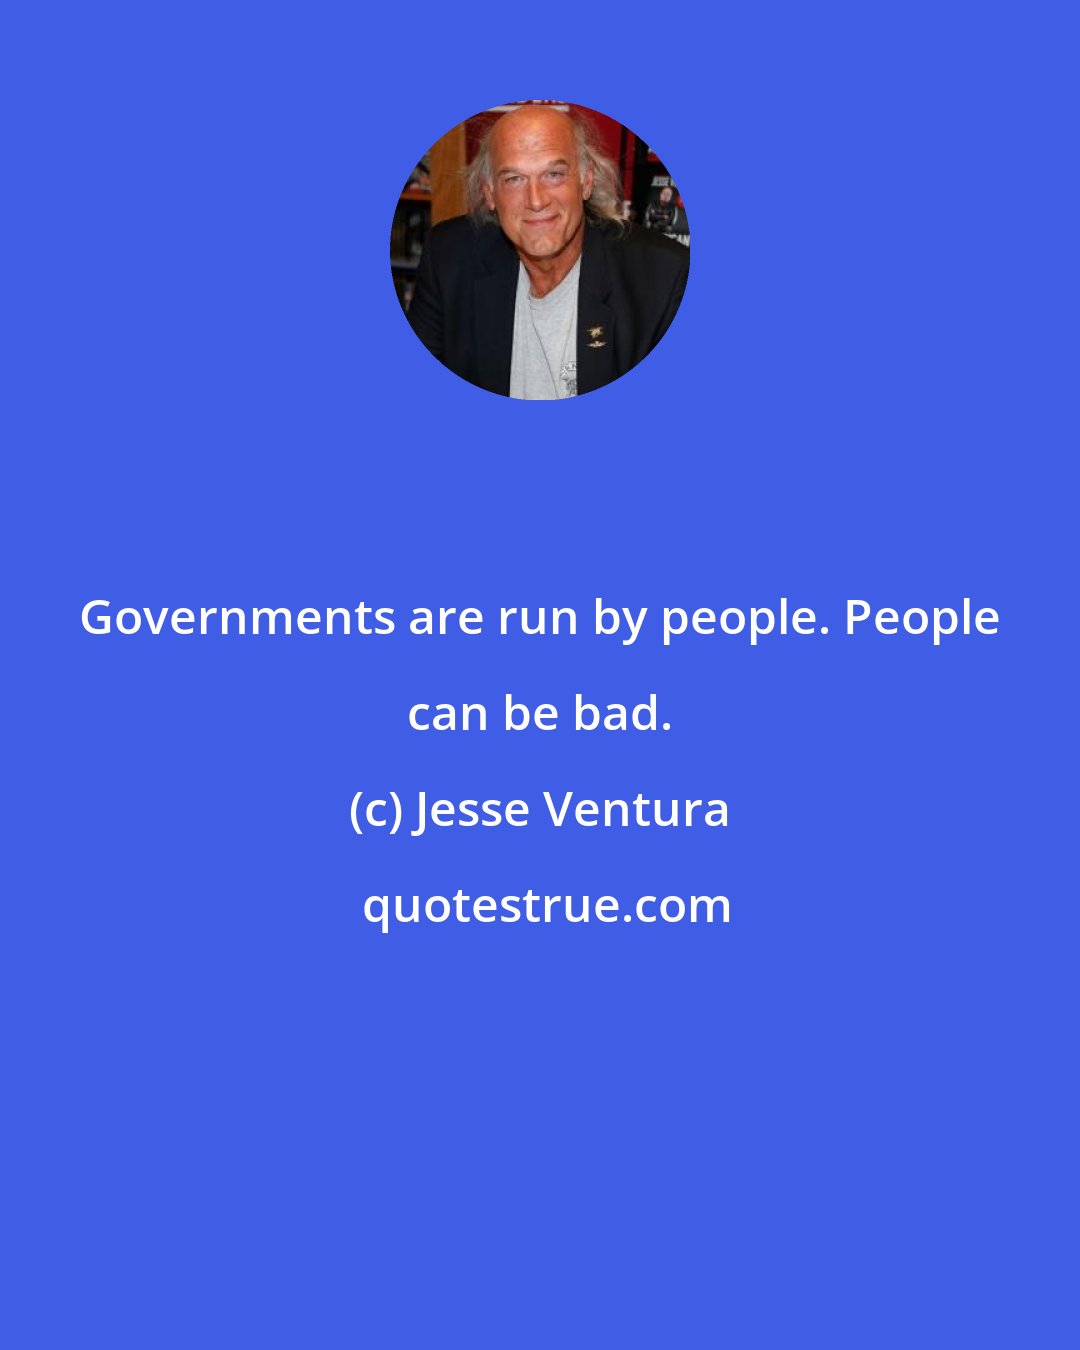 Jesse Ventura: Governments are run by people. People can be bad.